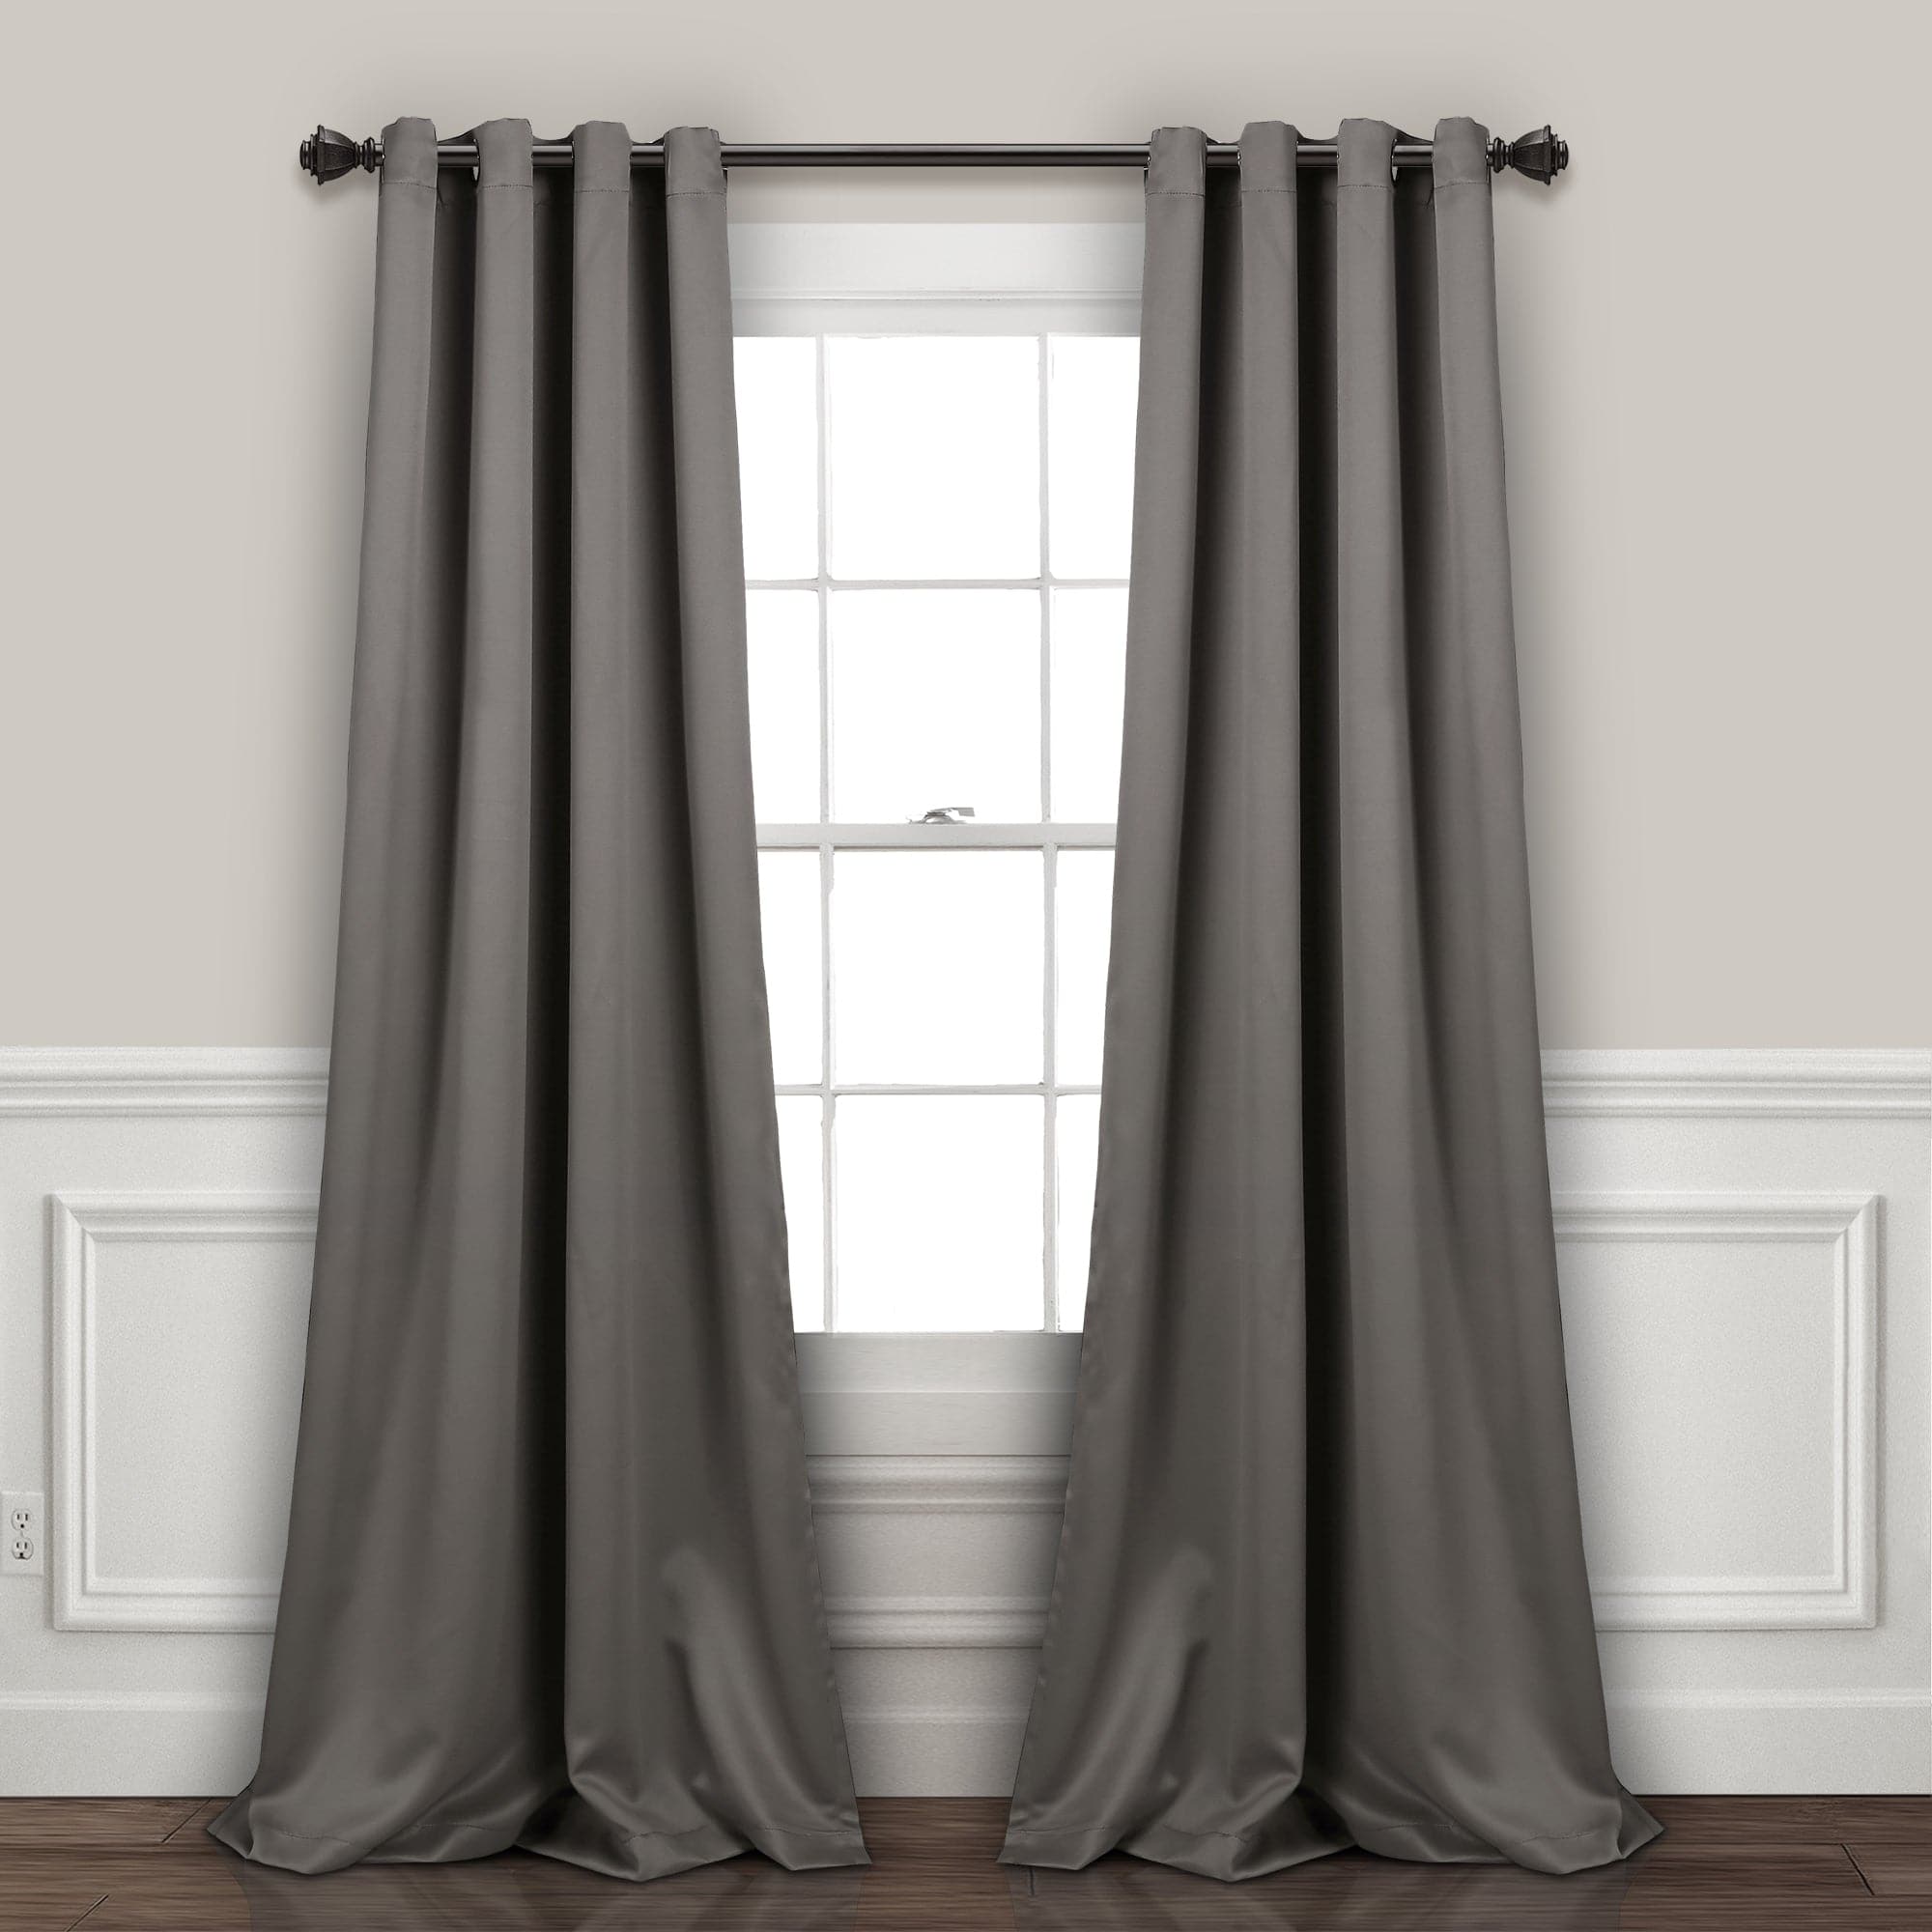 Gxi Stripes Burgundy Blackout Curtains Set 2 Panels Living Room Room  Darkening Thermal Insulated Grommet Drapes Curtain for Bedroom, Each Panel  W92 x